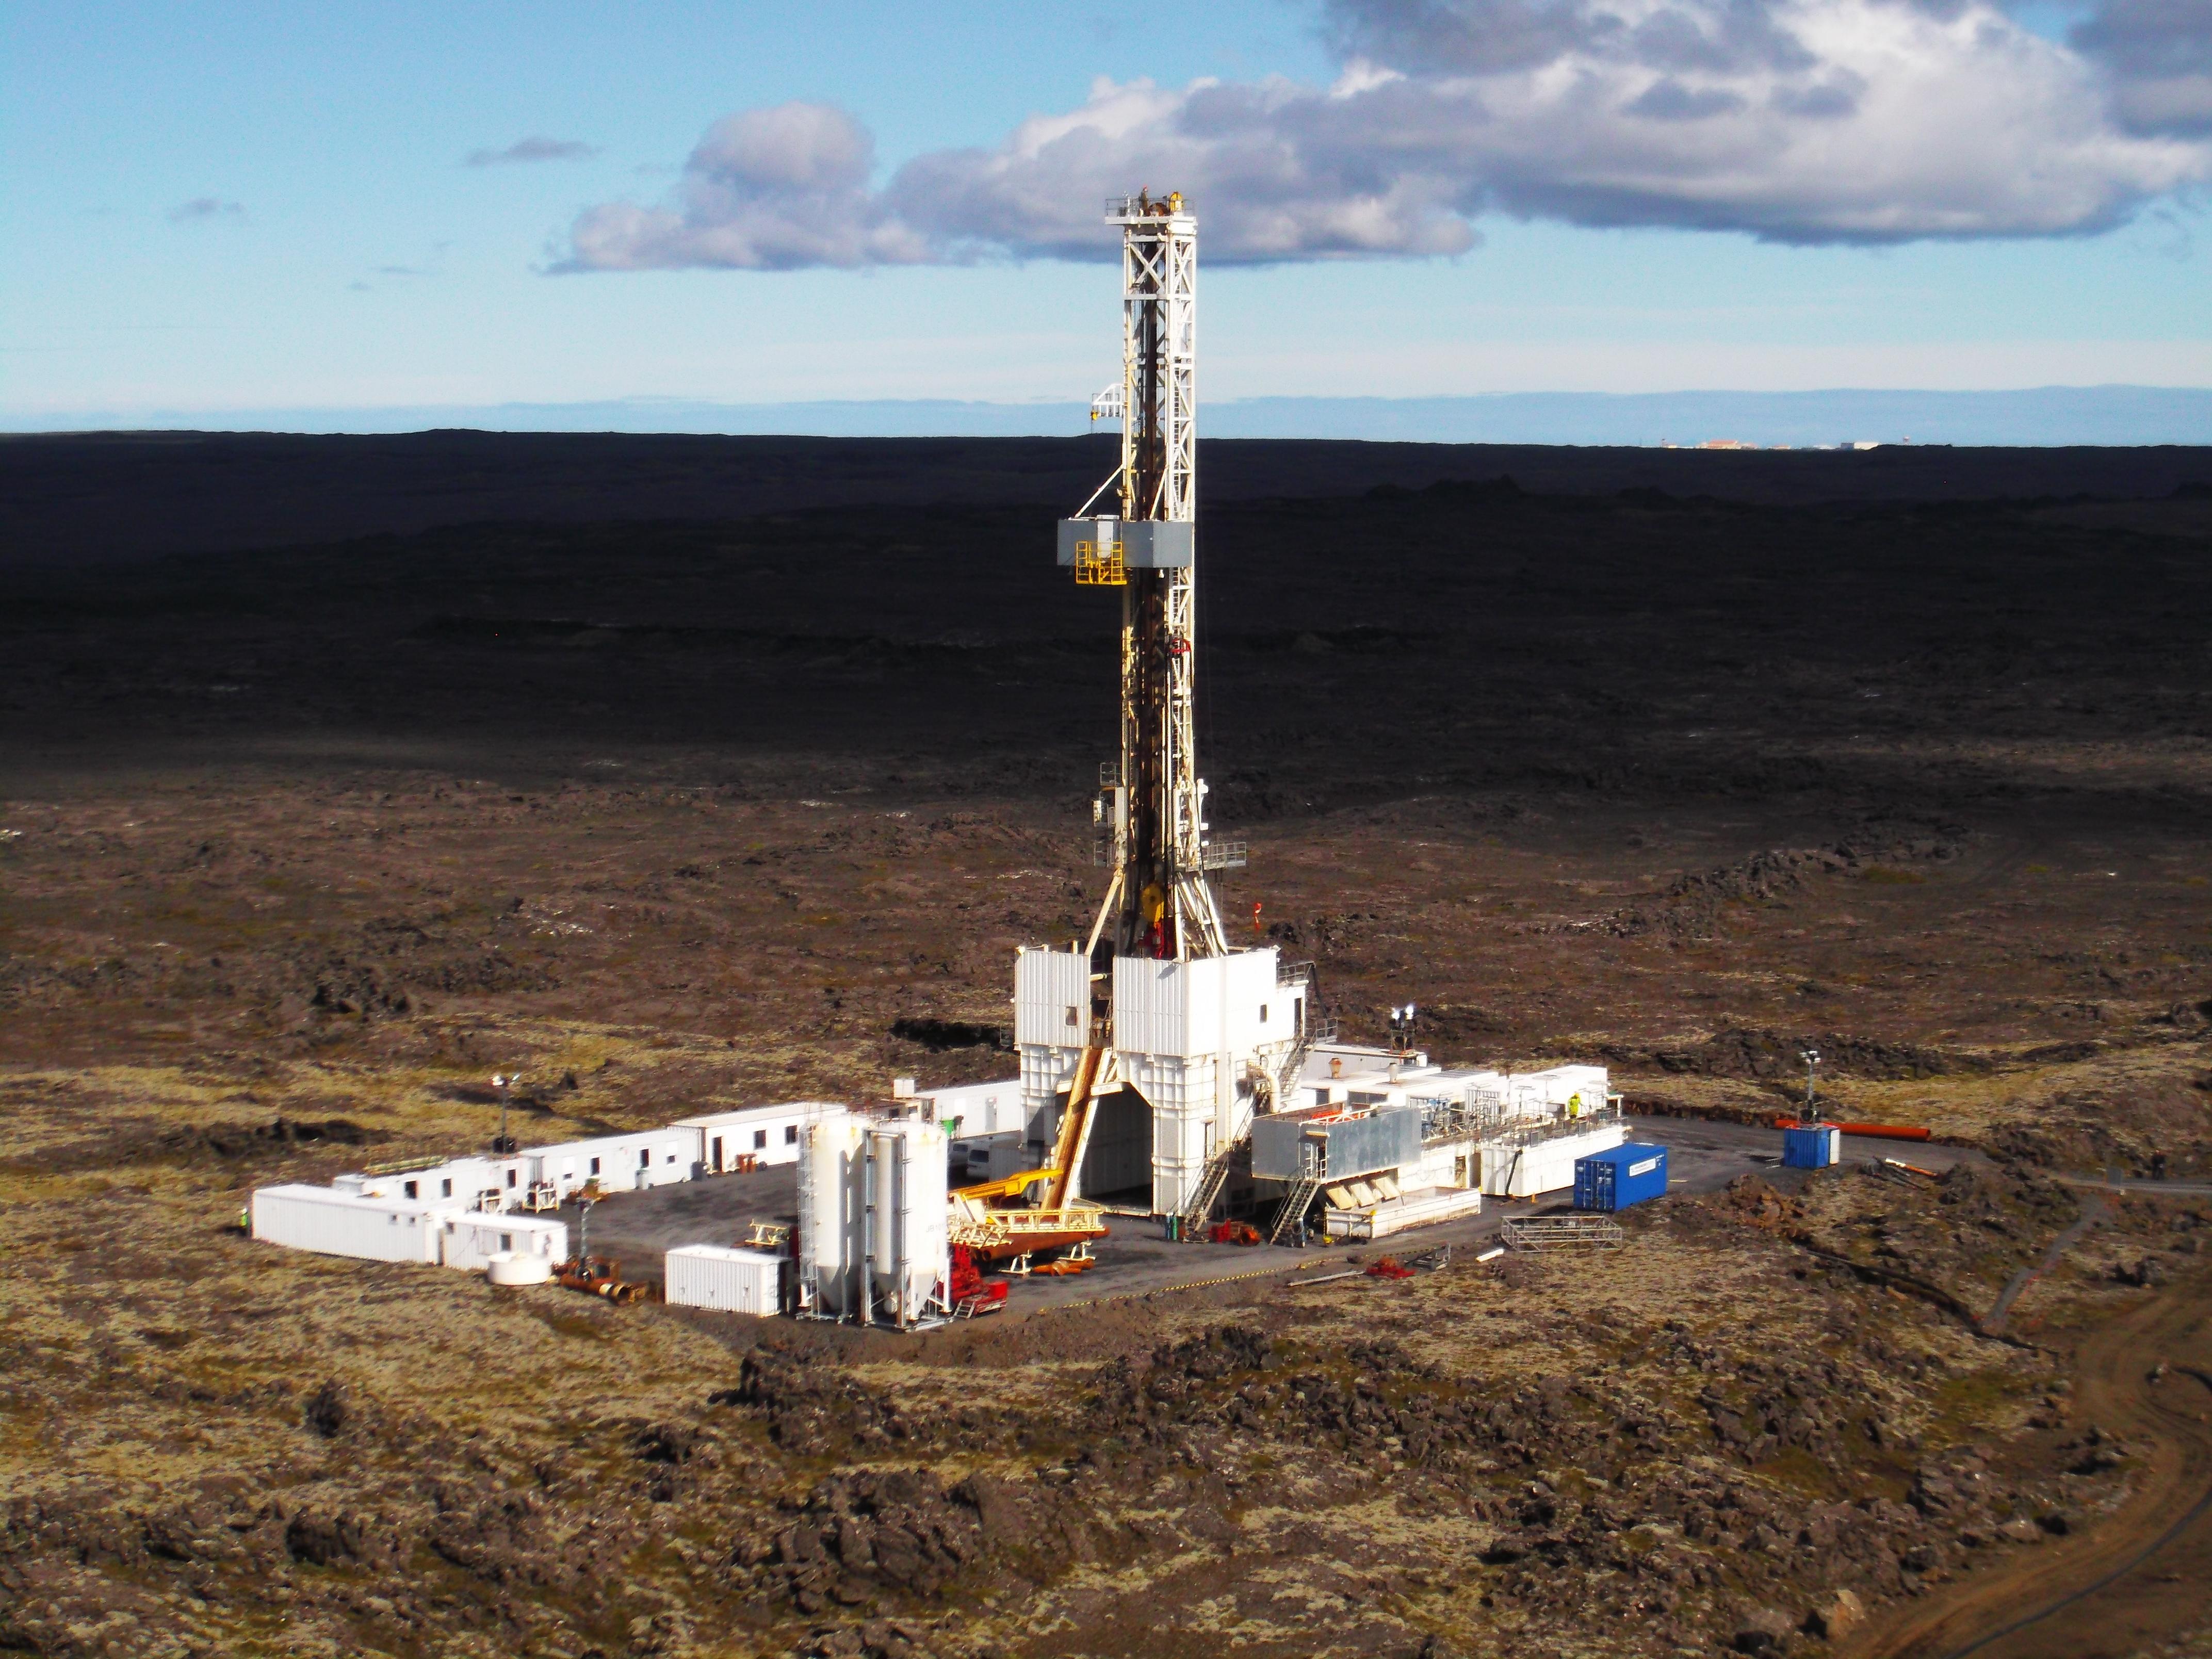 If successful Icelandic project could derive 30 to 50 MW from one